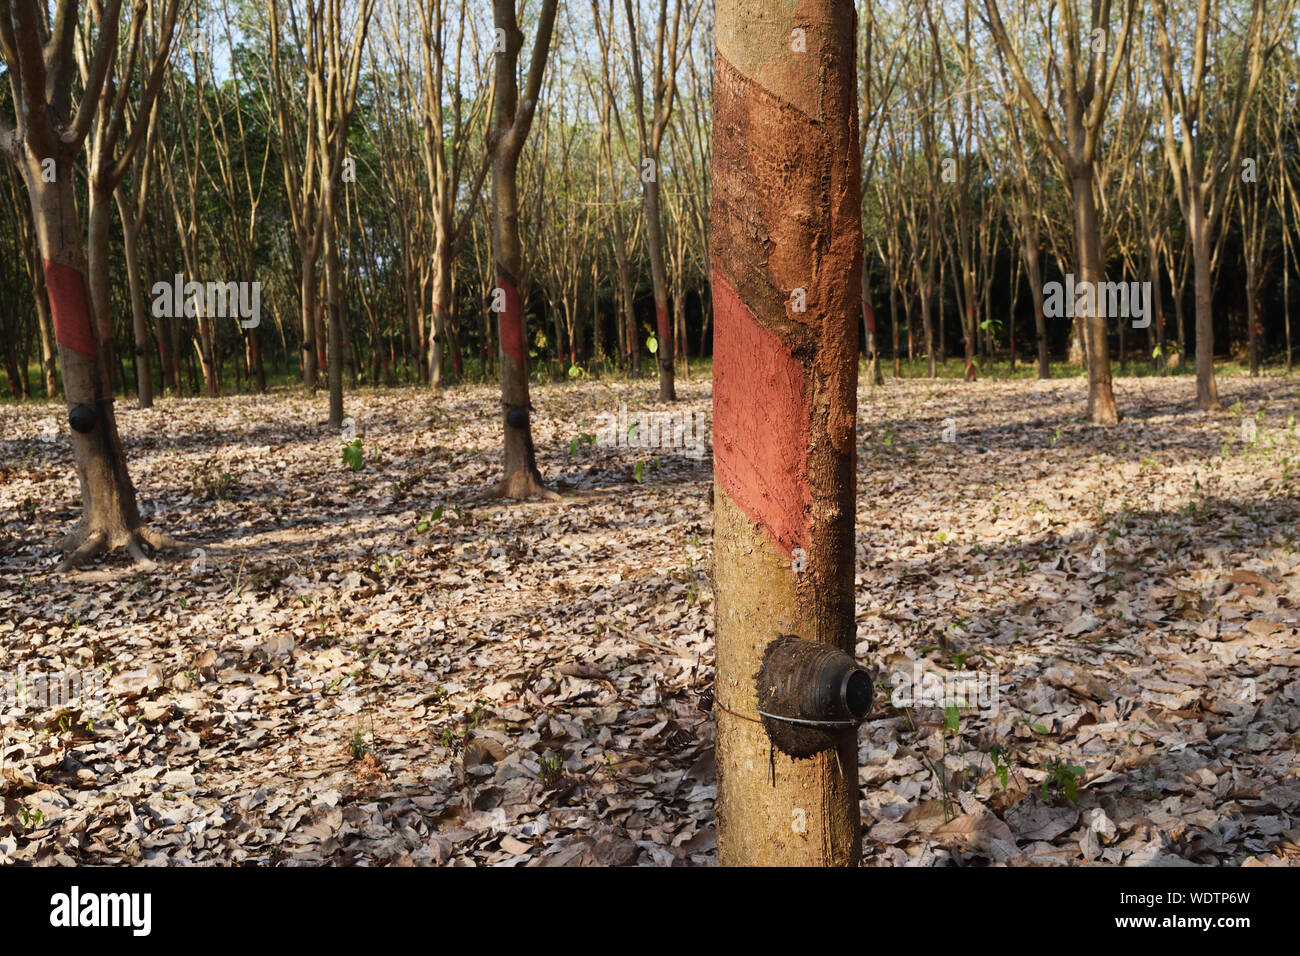 Tree trunk that has been coated with brown chemicals to prevent germs, Rubber Plantation in Thailand, Leaves turn to brown and fall to the ground Stock Photo